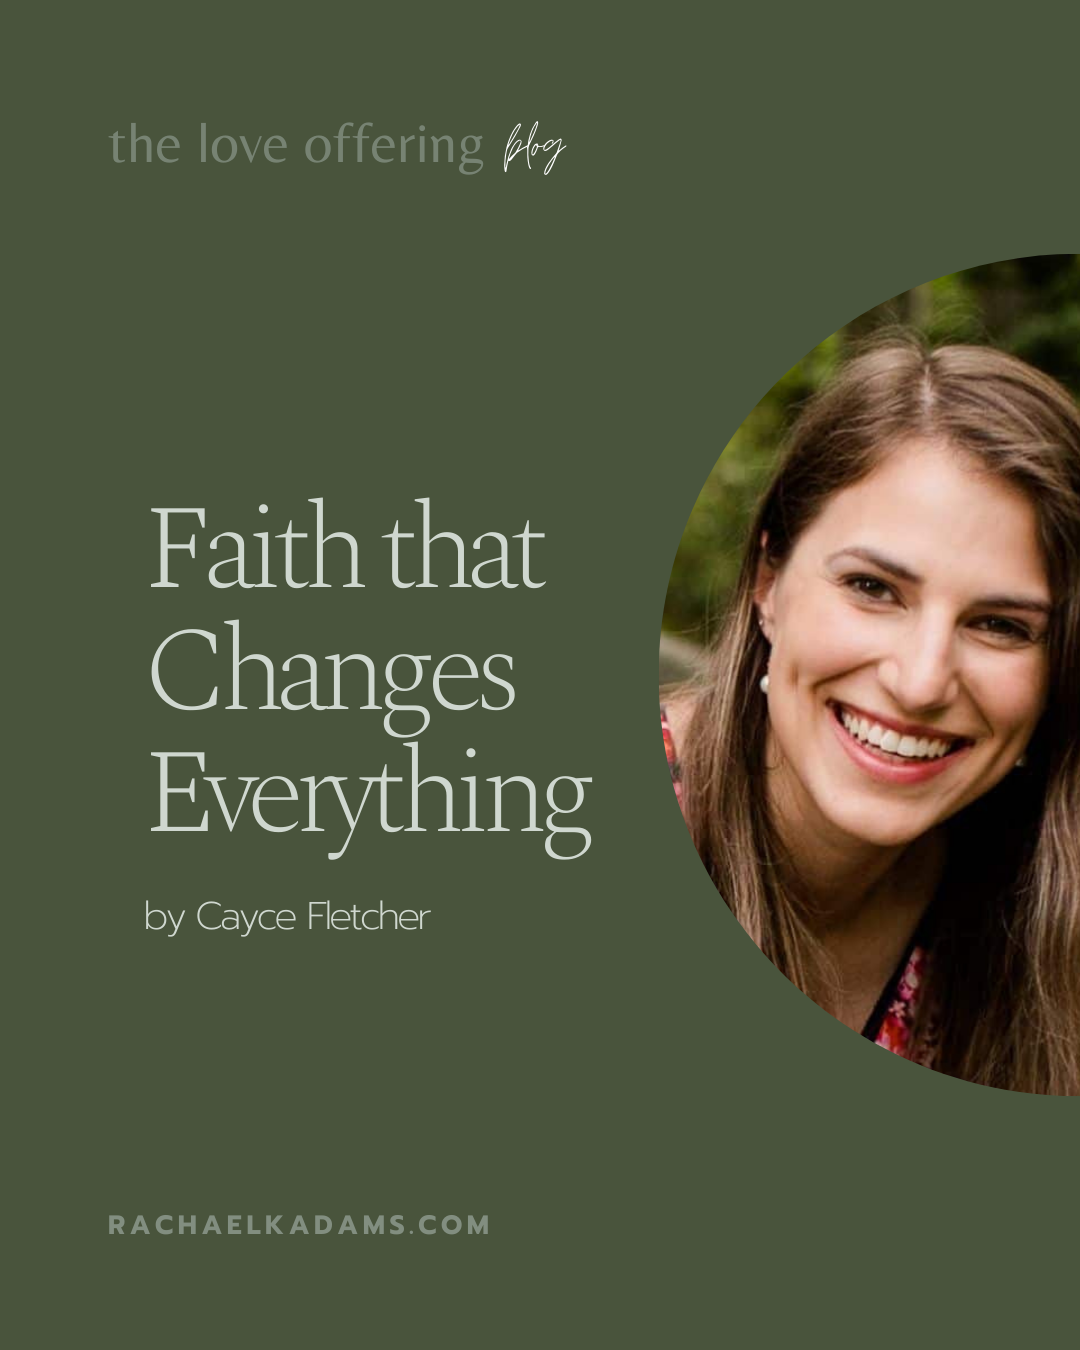 Faith that Changes Everything by Cayce Fletcher